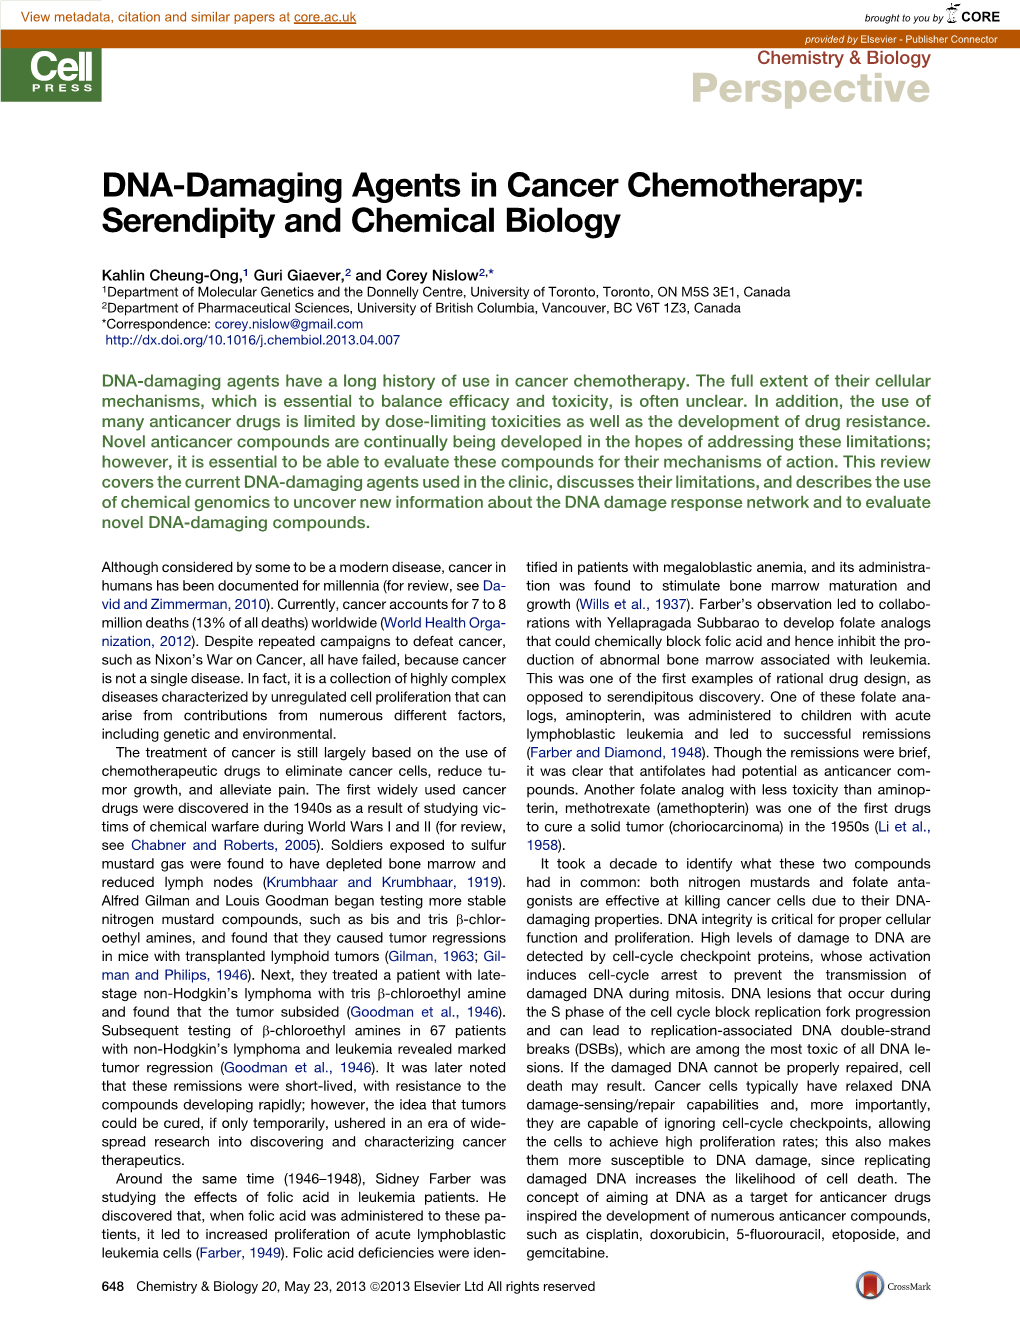 DNA-Damaging Agents in Cancer Chemotherapy: Serendipity and Chemical Biology